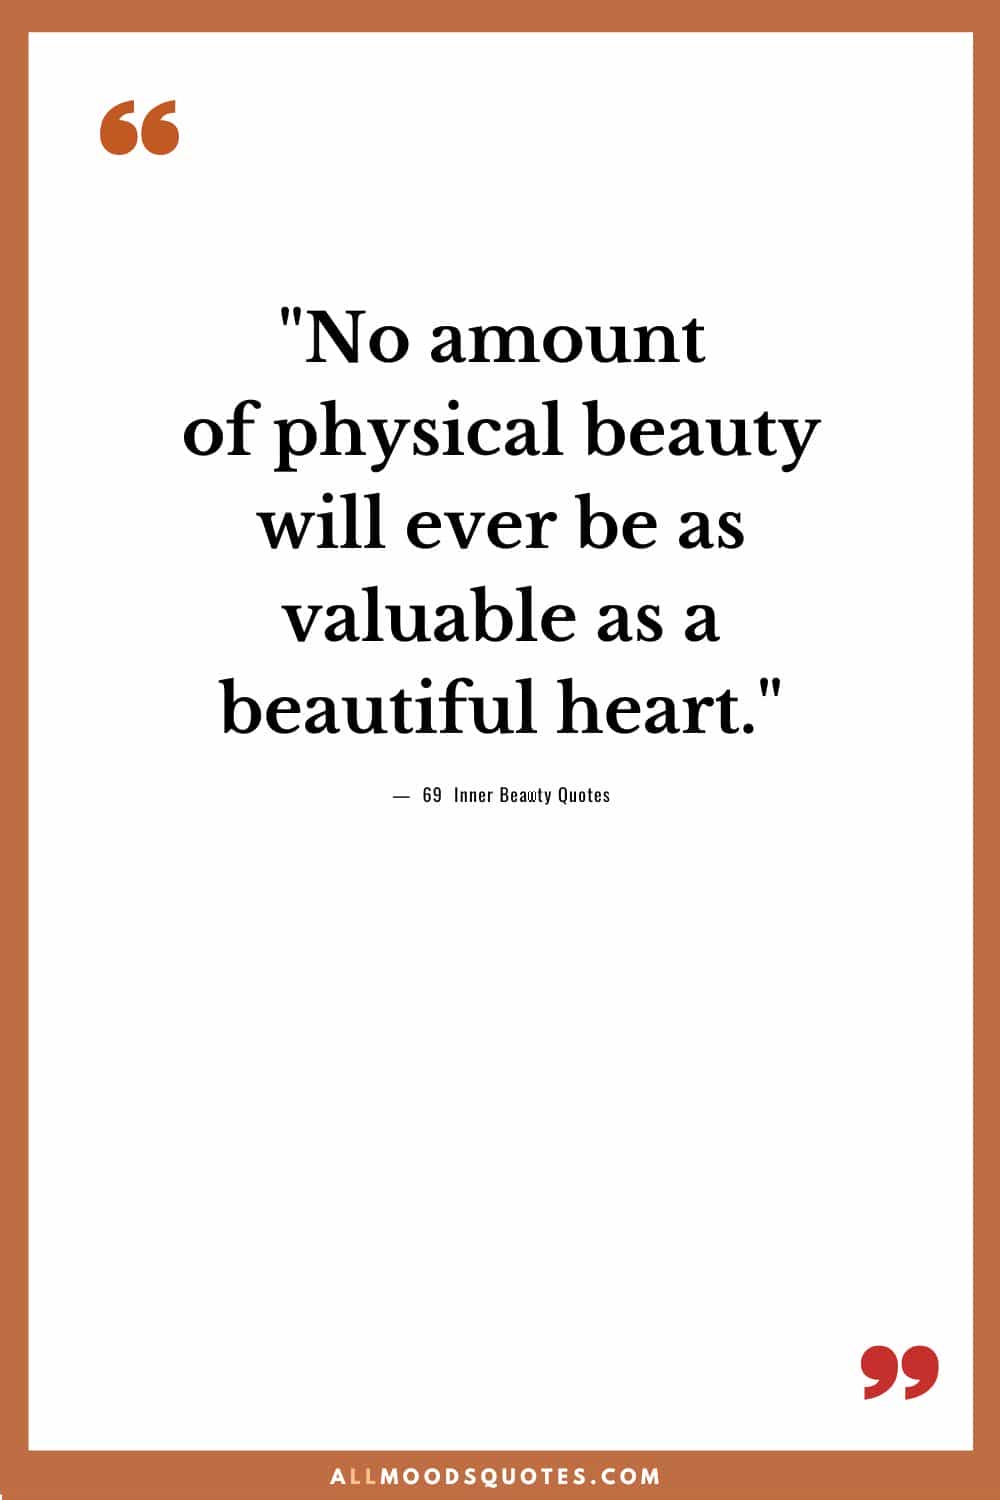 No amount of physical beauty will ever be as valuable as a beautiful heart.